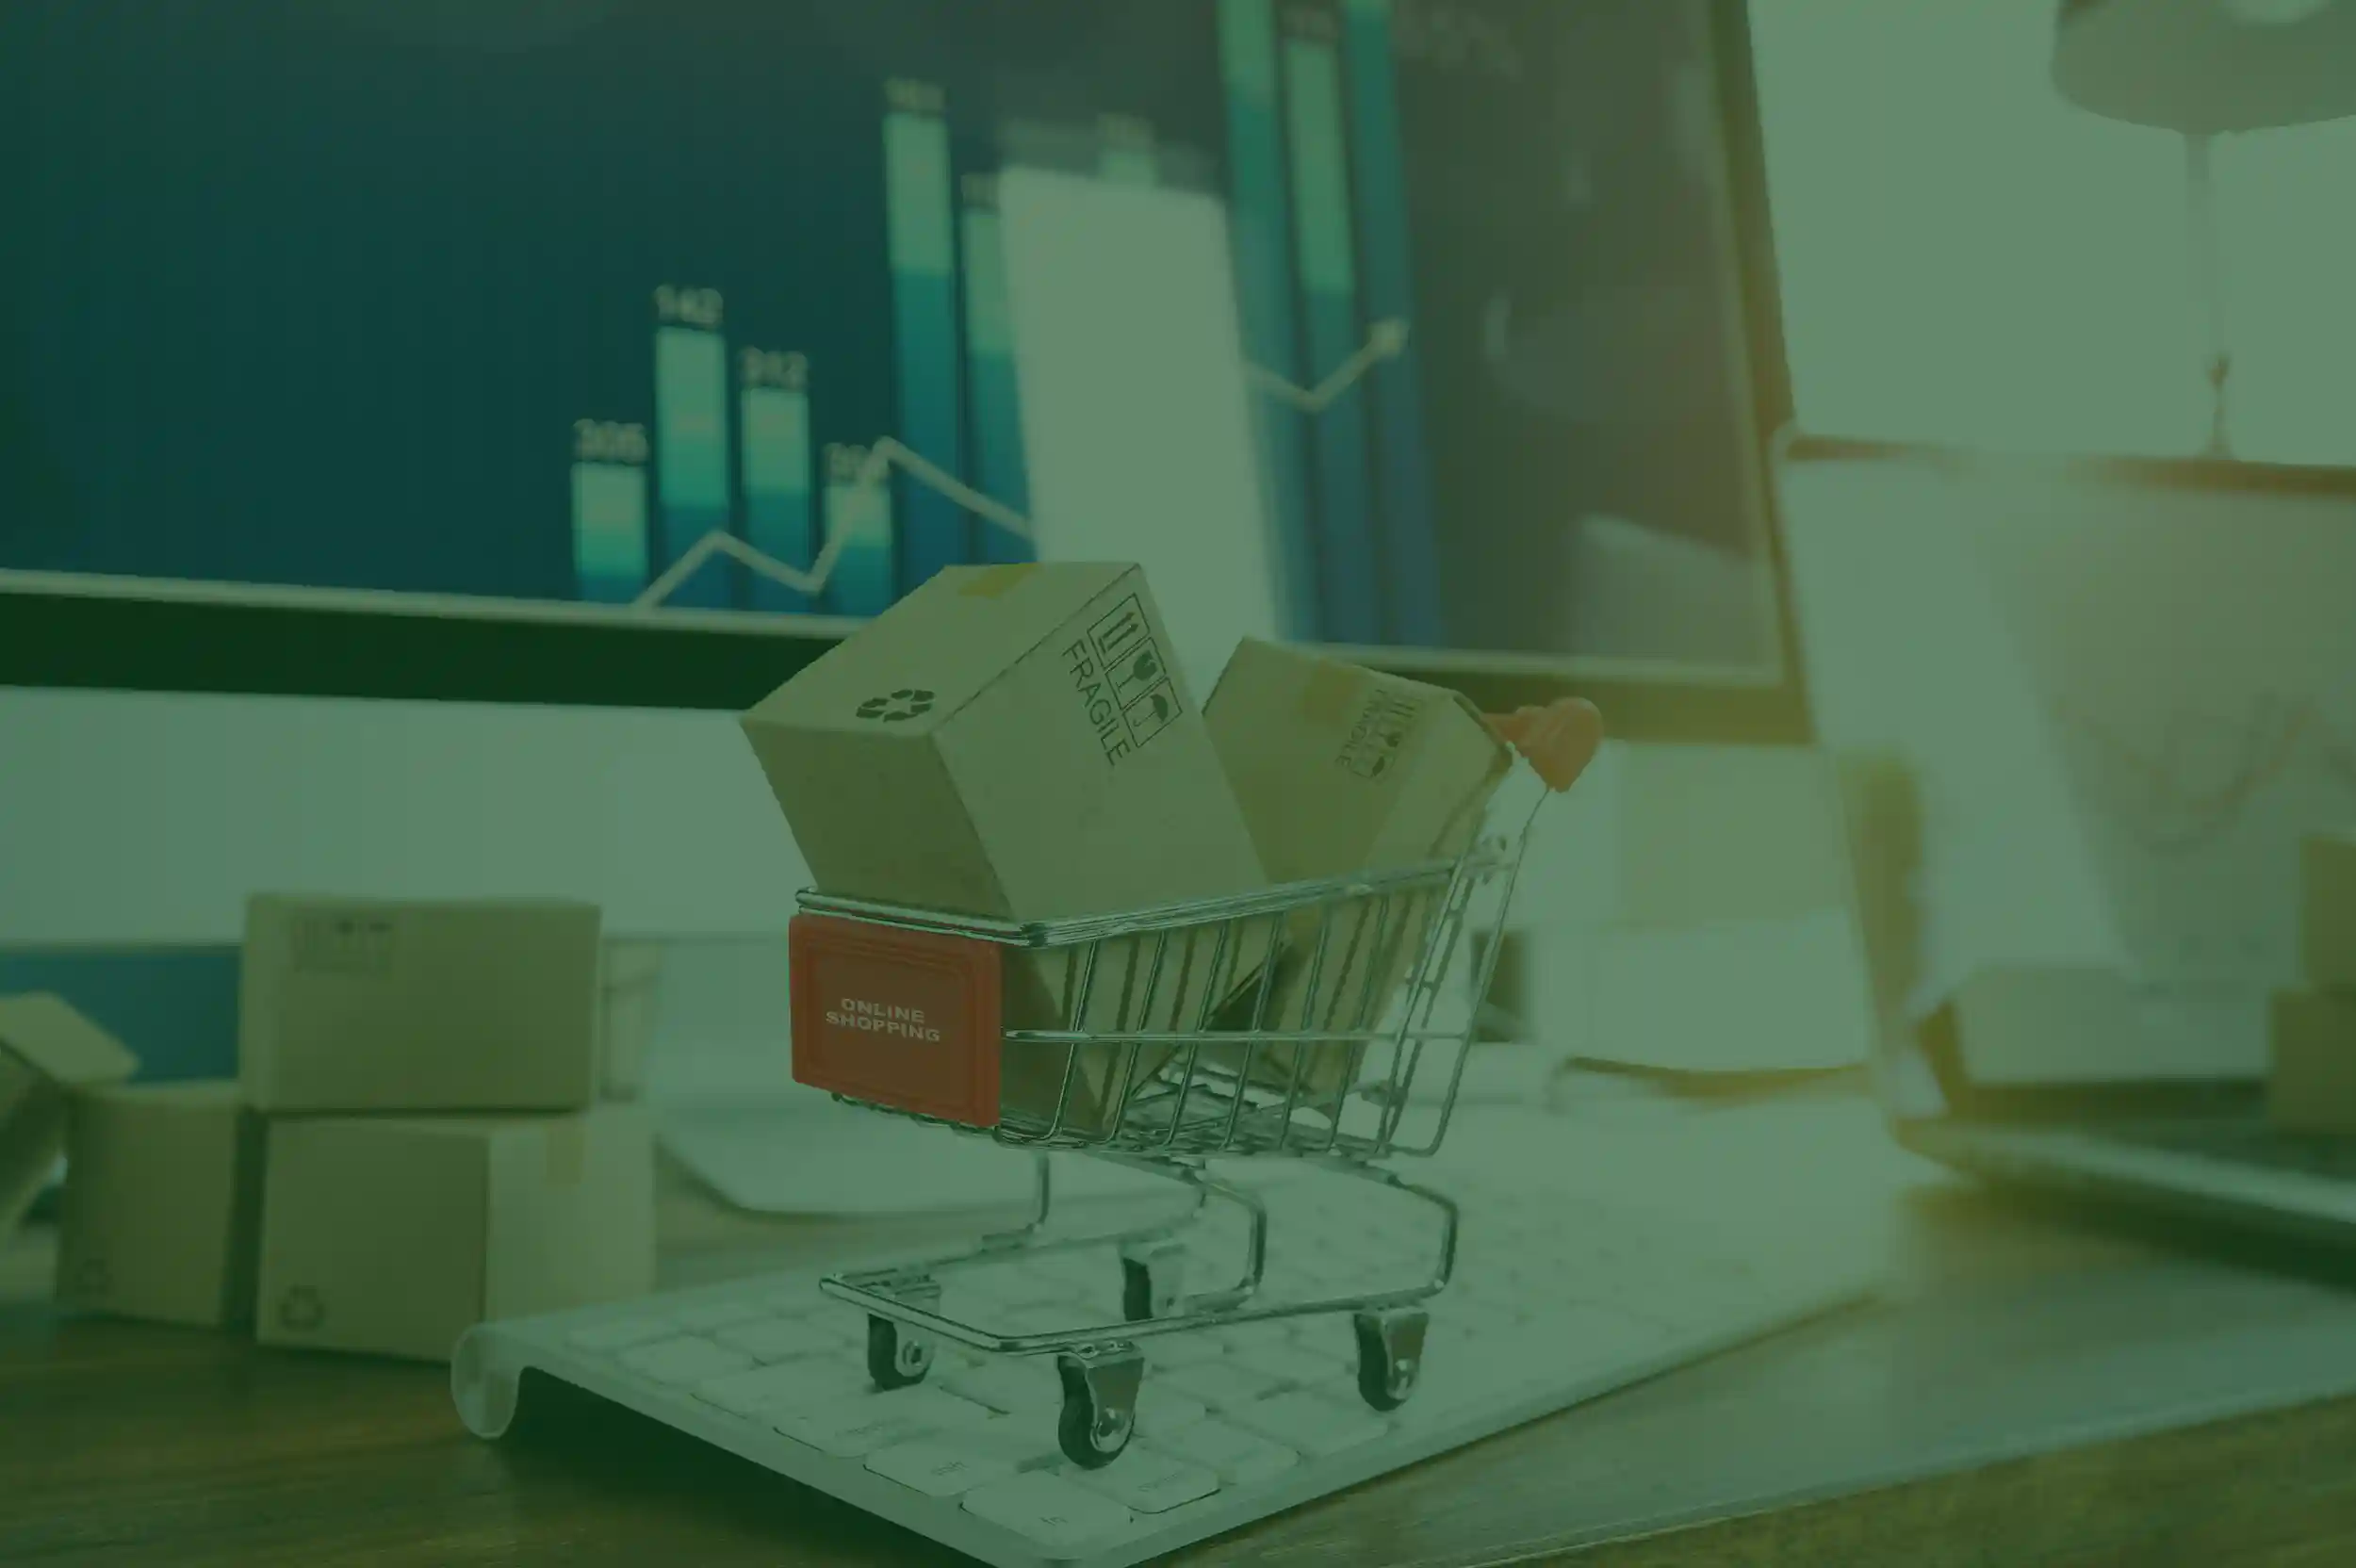 Online shopping cart and data analytics cart in the background